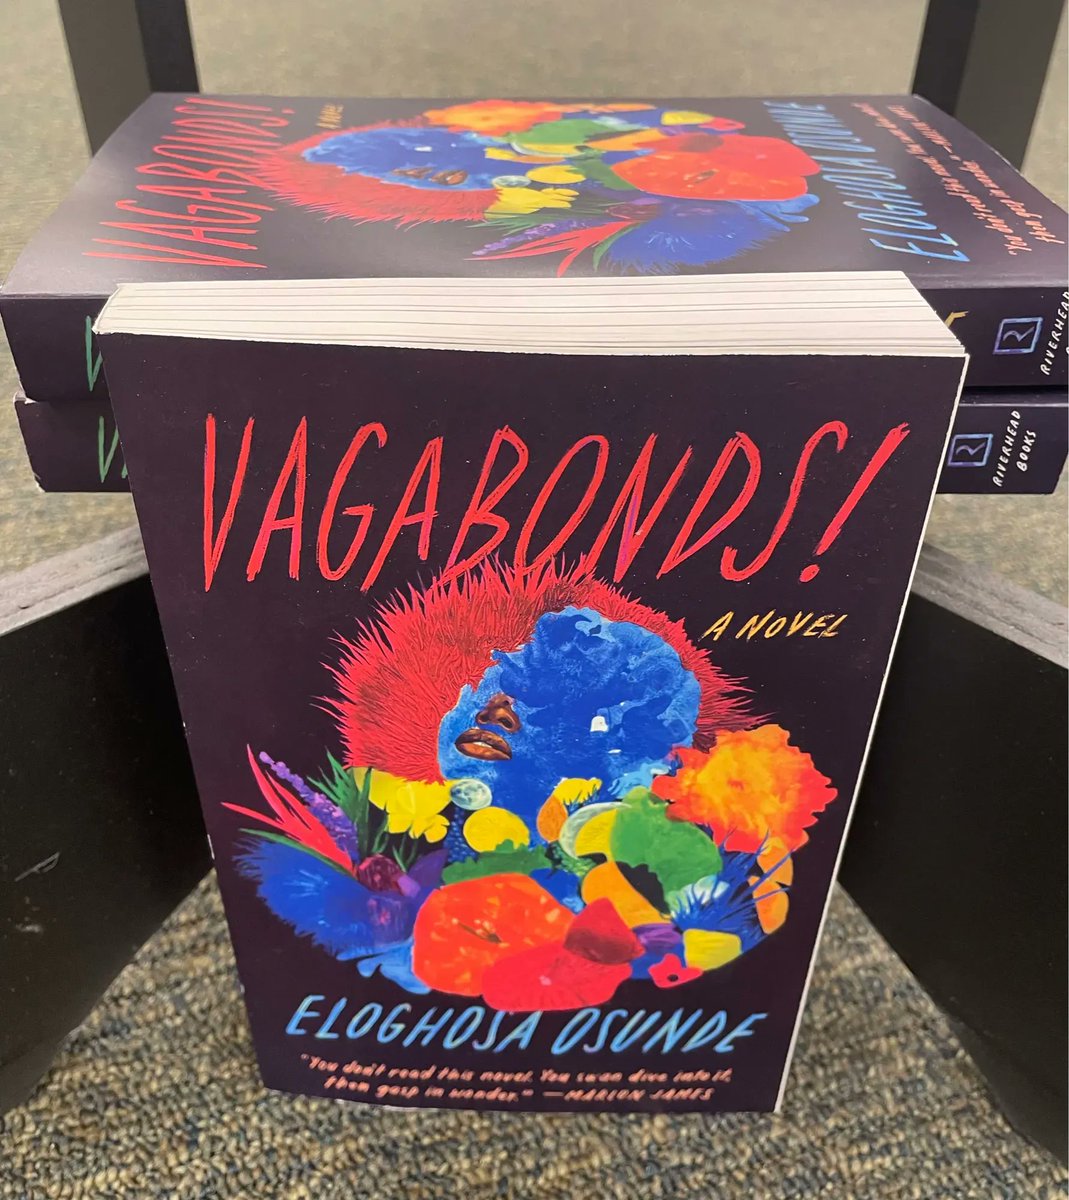 Our latest Discover pick is an imaginative love letter to the 'vagabonds' who live their lives in the margins. #bndiscoverpick #mustread #tbrpile